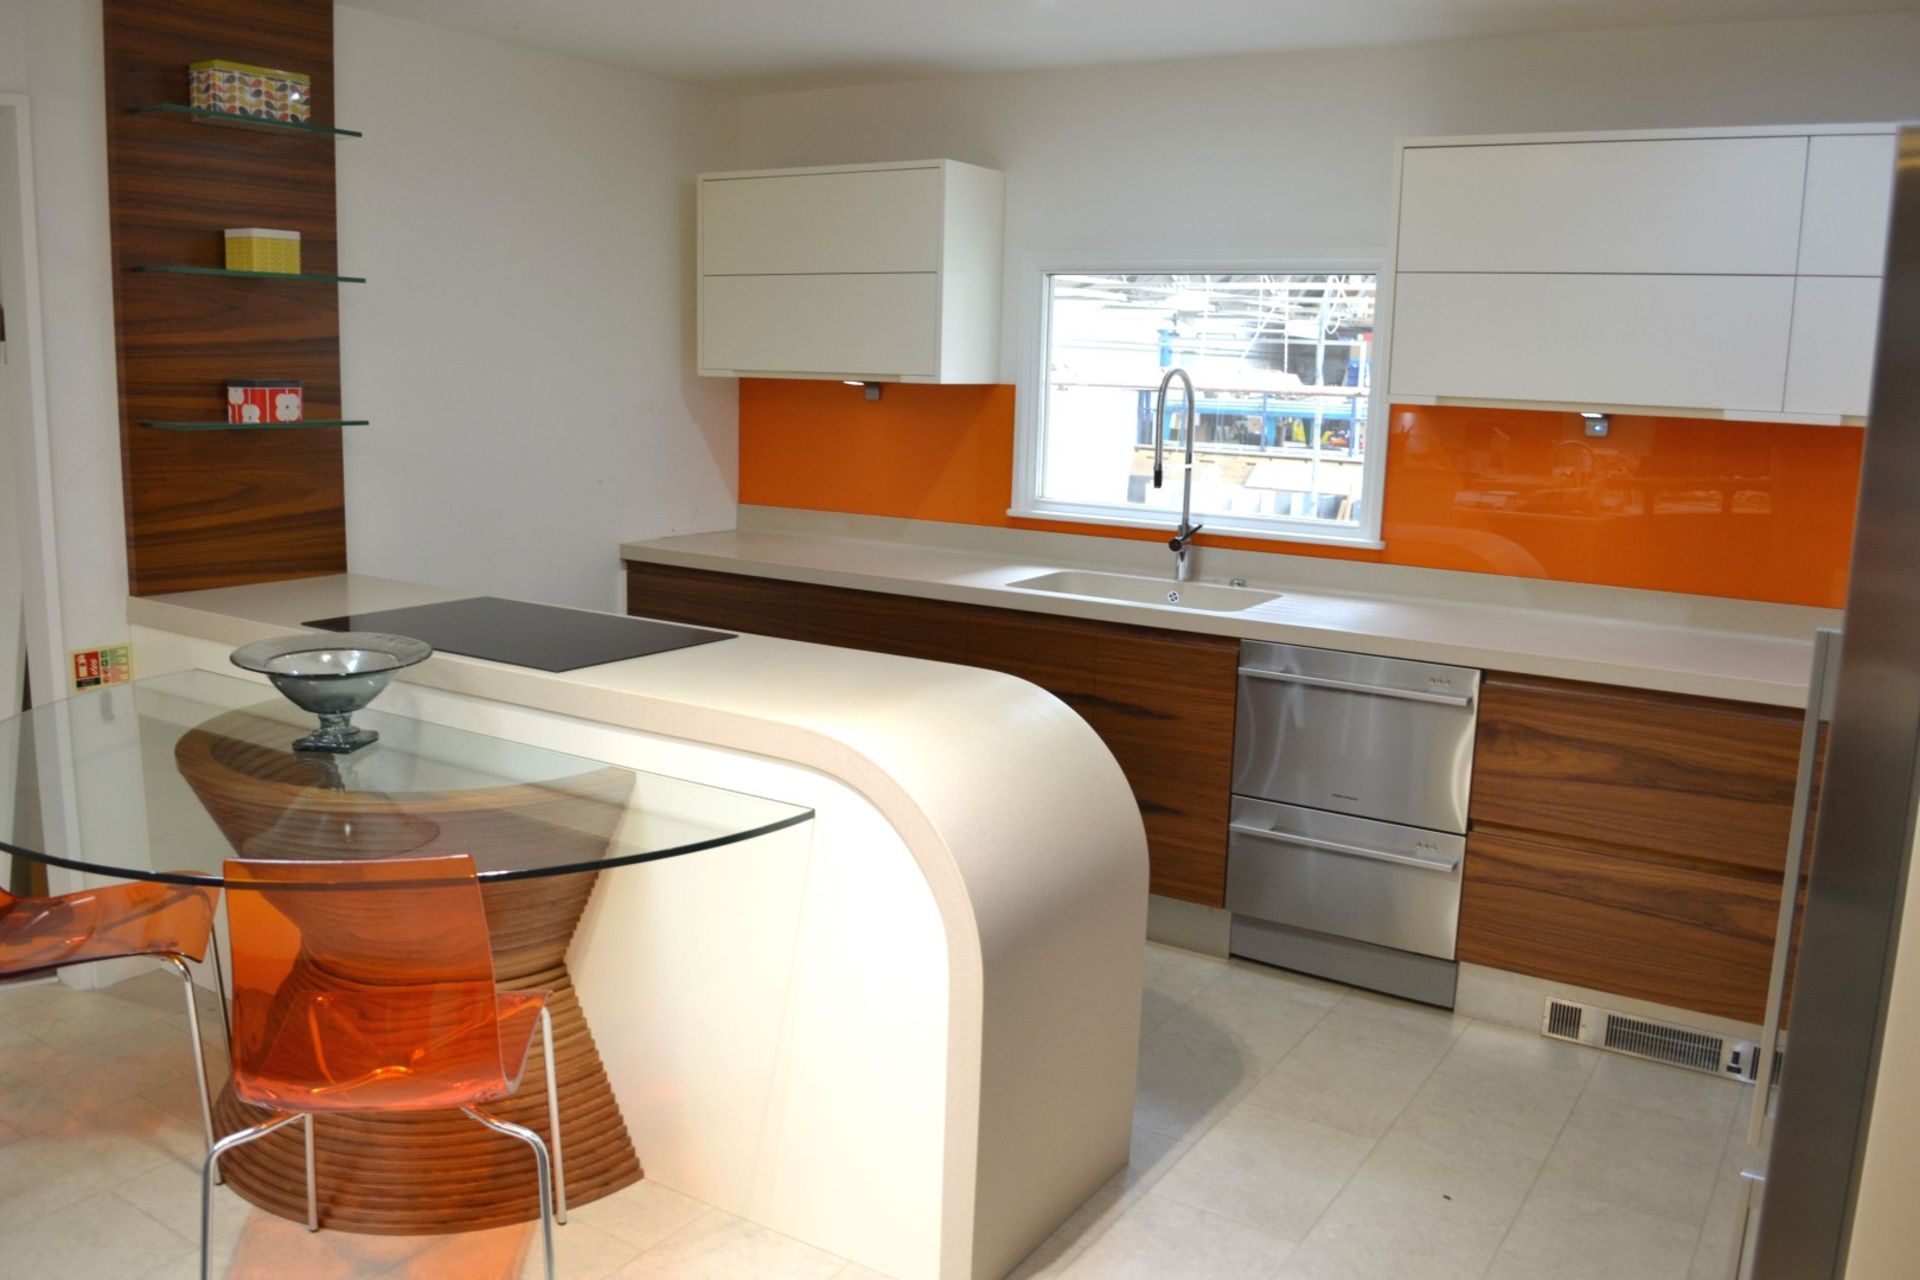 1 x Unused Bespoke Display Kitchen in Perfect Condition - Includes Unused Neff and Fisher & Paykel - Image 9 of 60